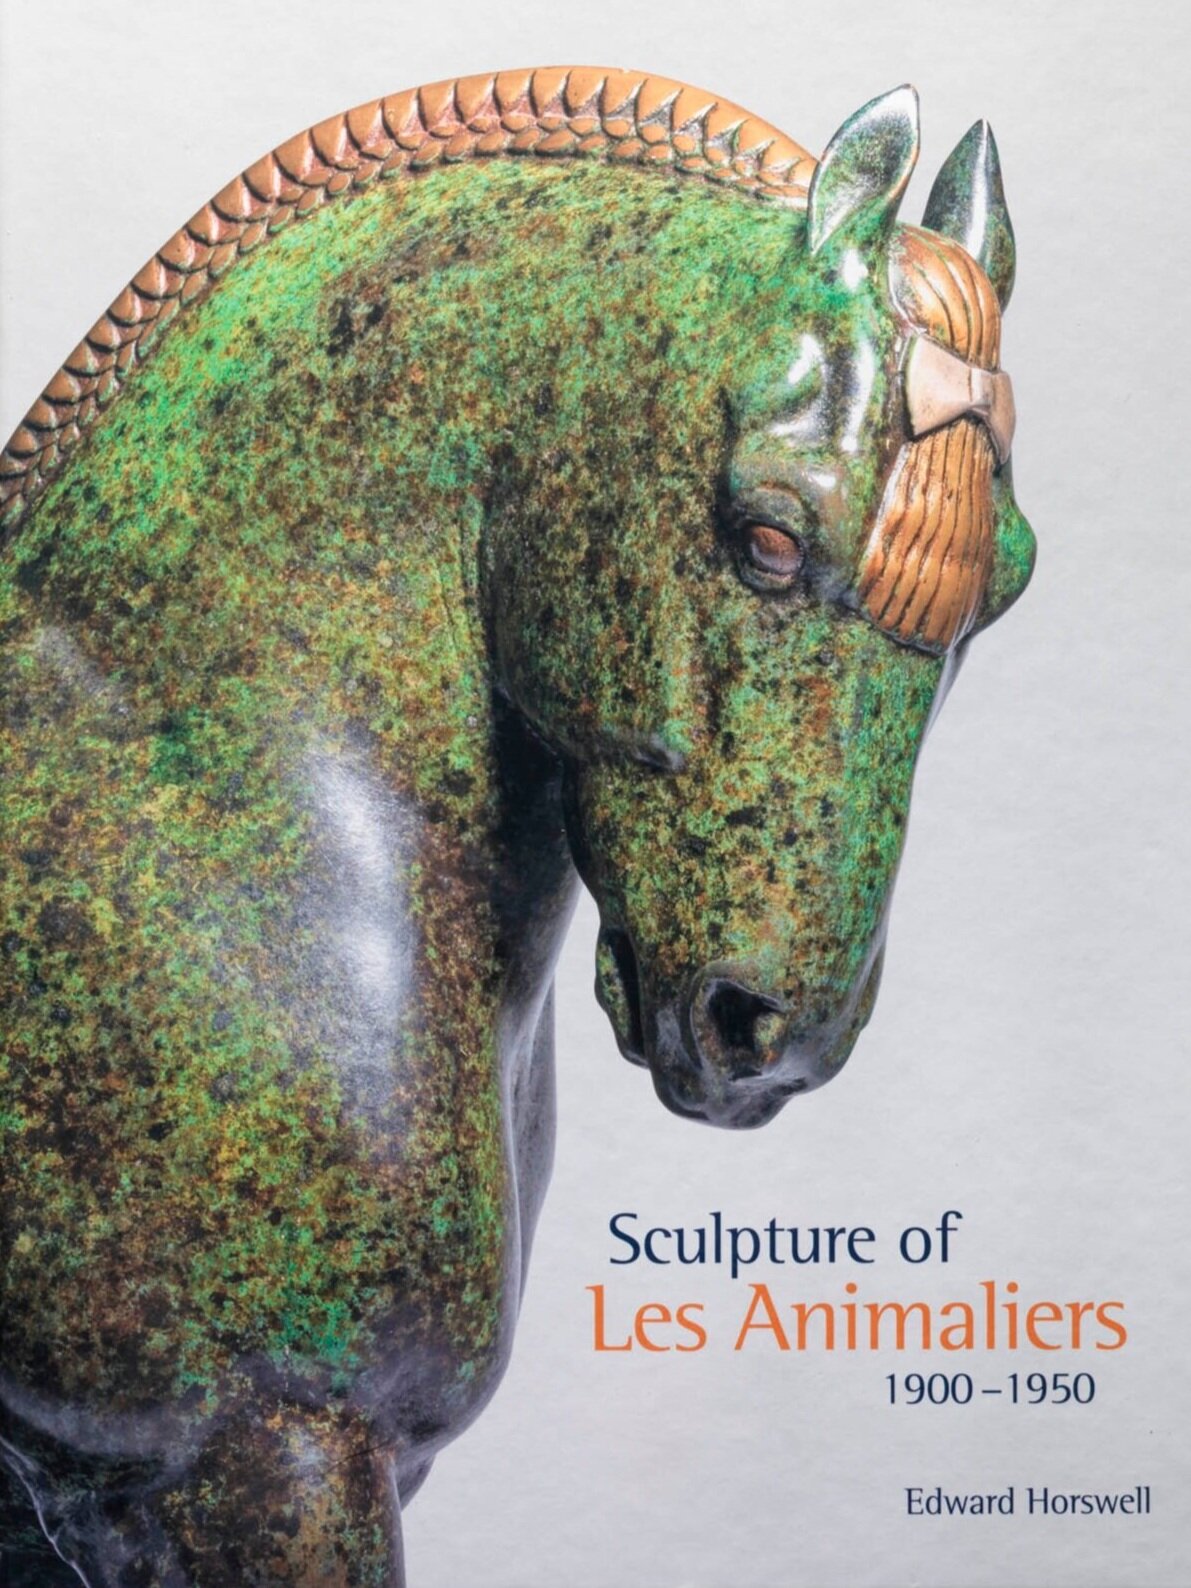 Sculpture of Les Animaliers by Edward Horswell